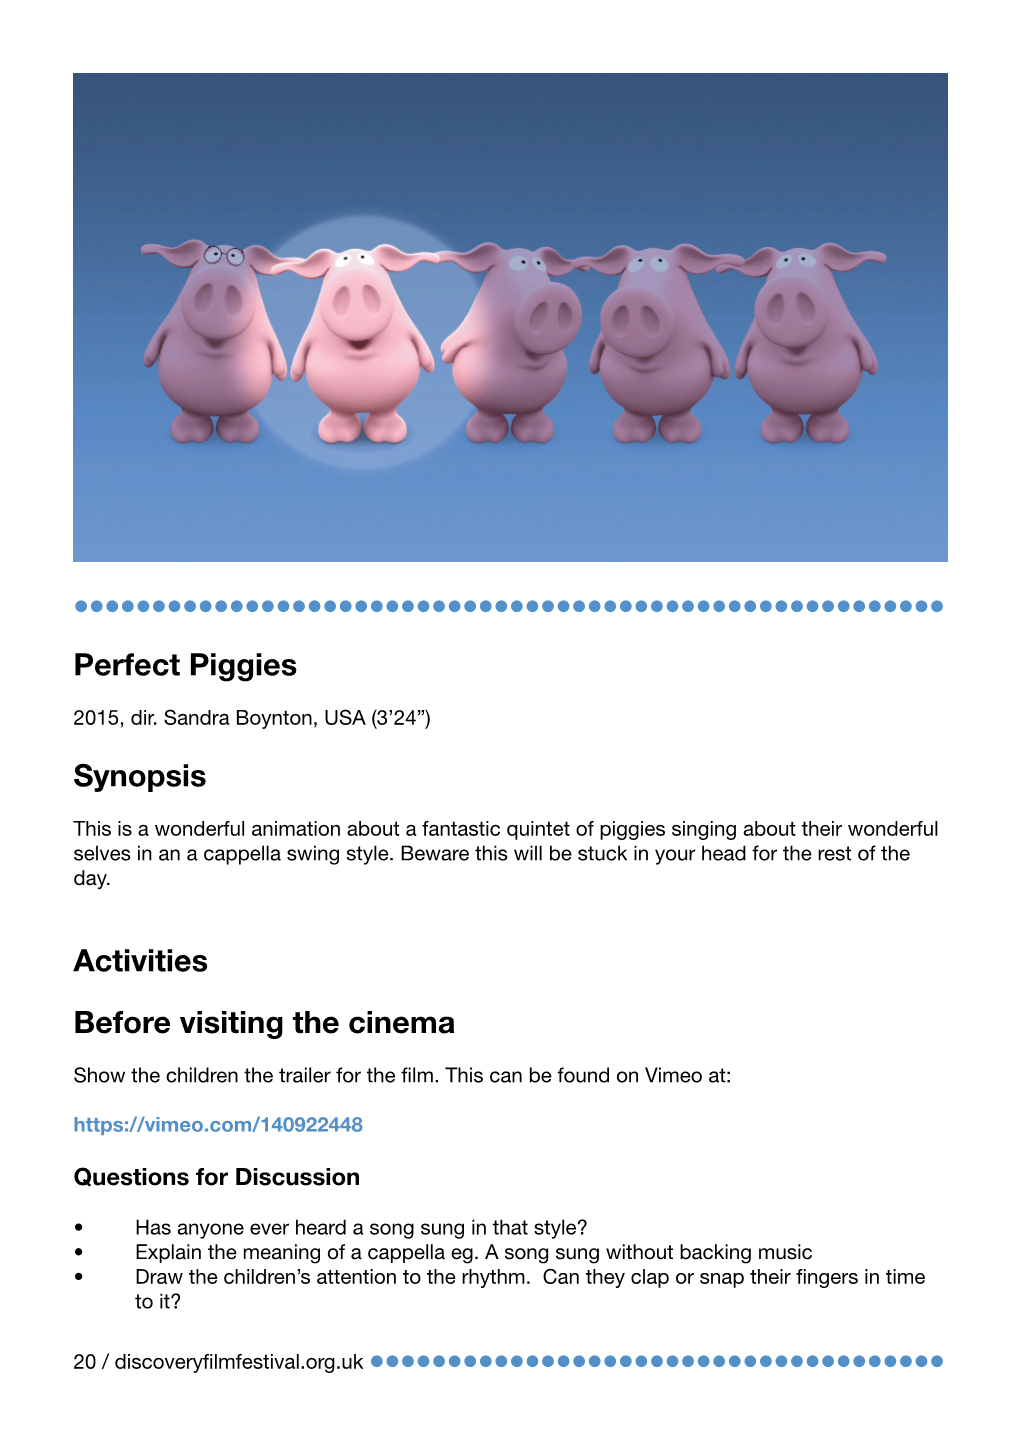 Perfect Piggies Synopsis Activities Before Visiting the Cinema